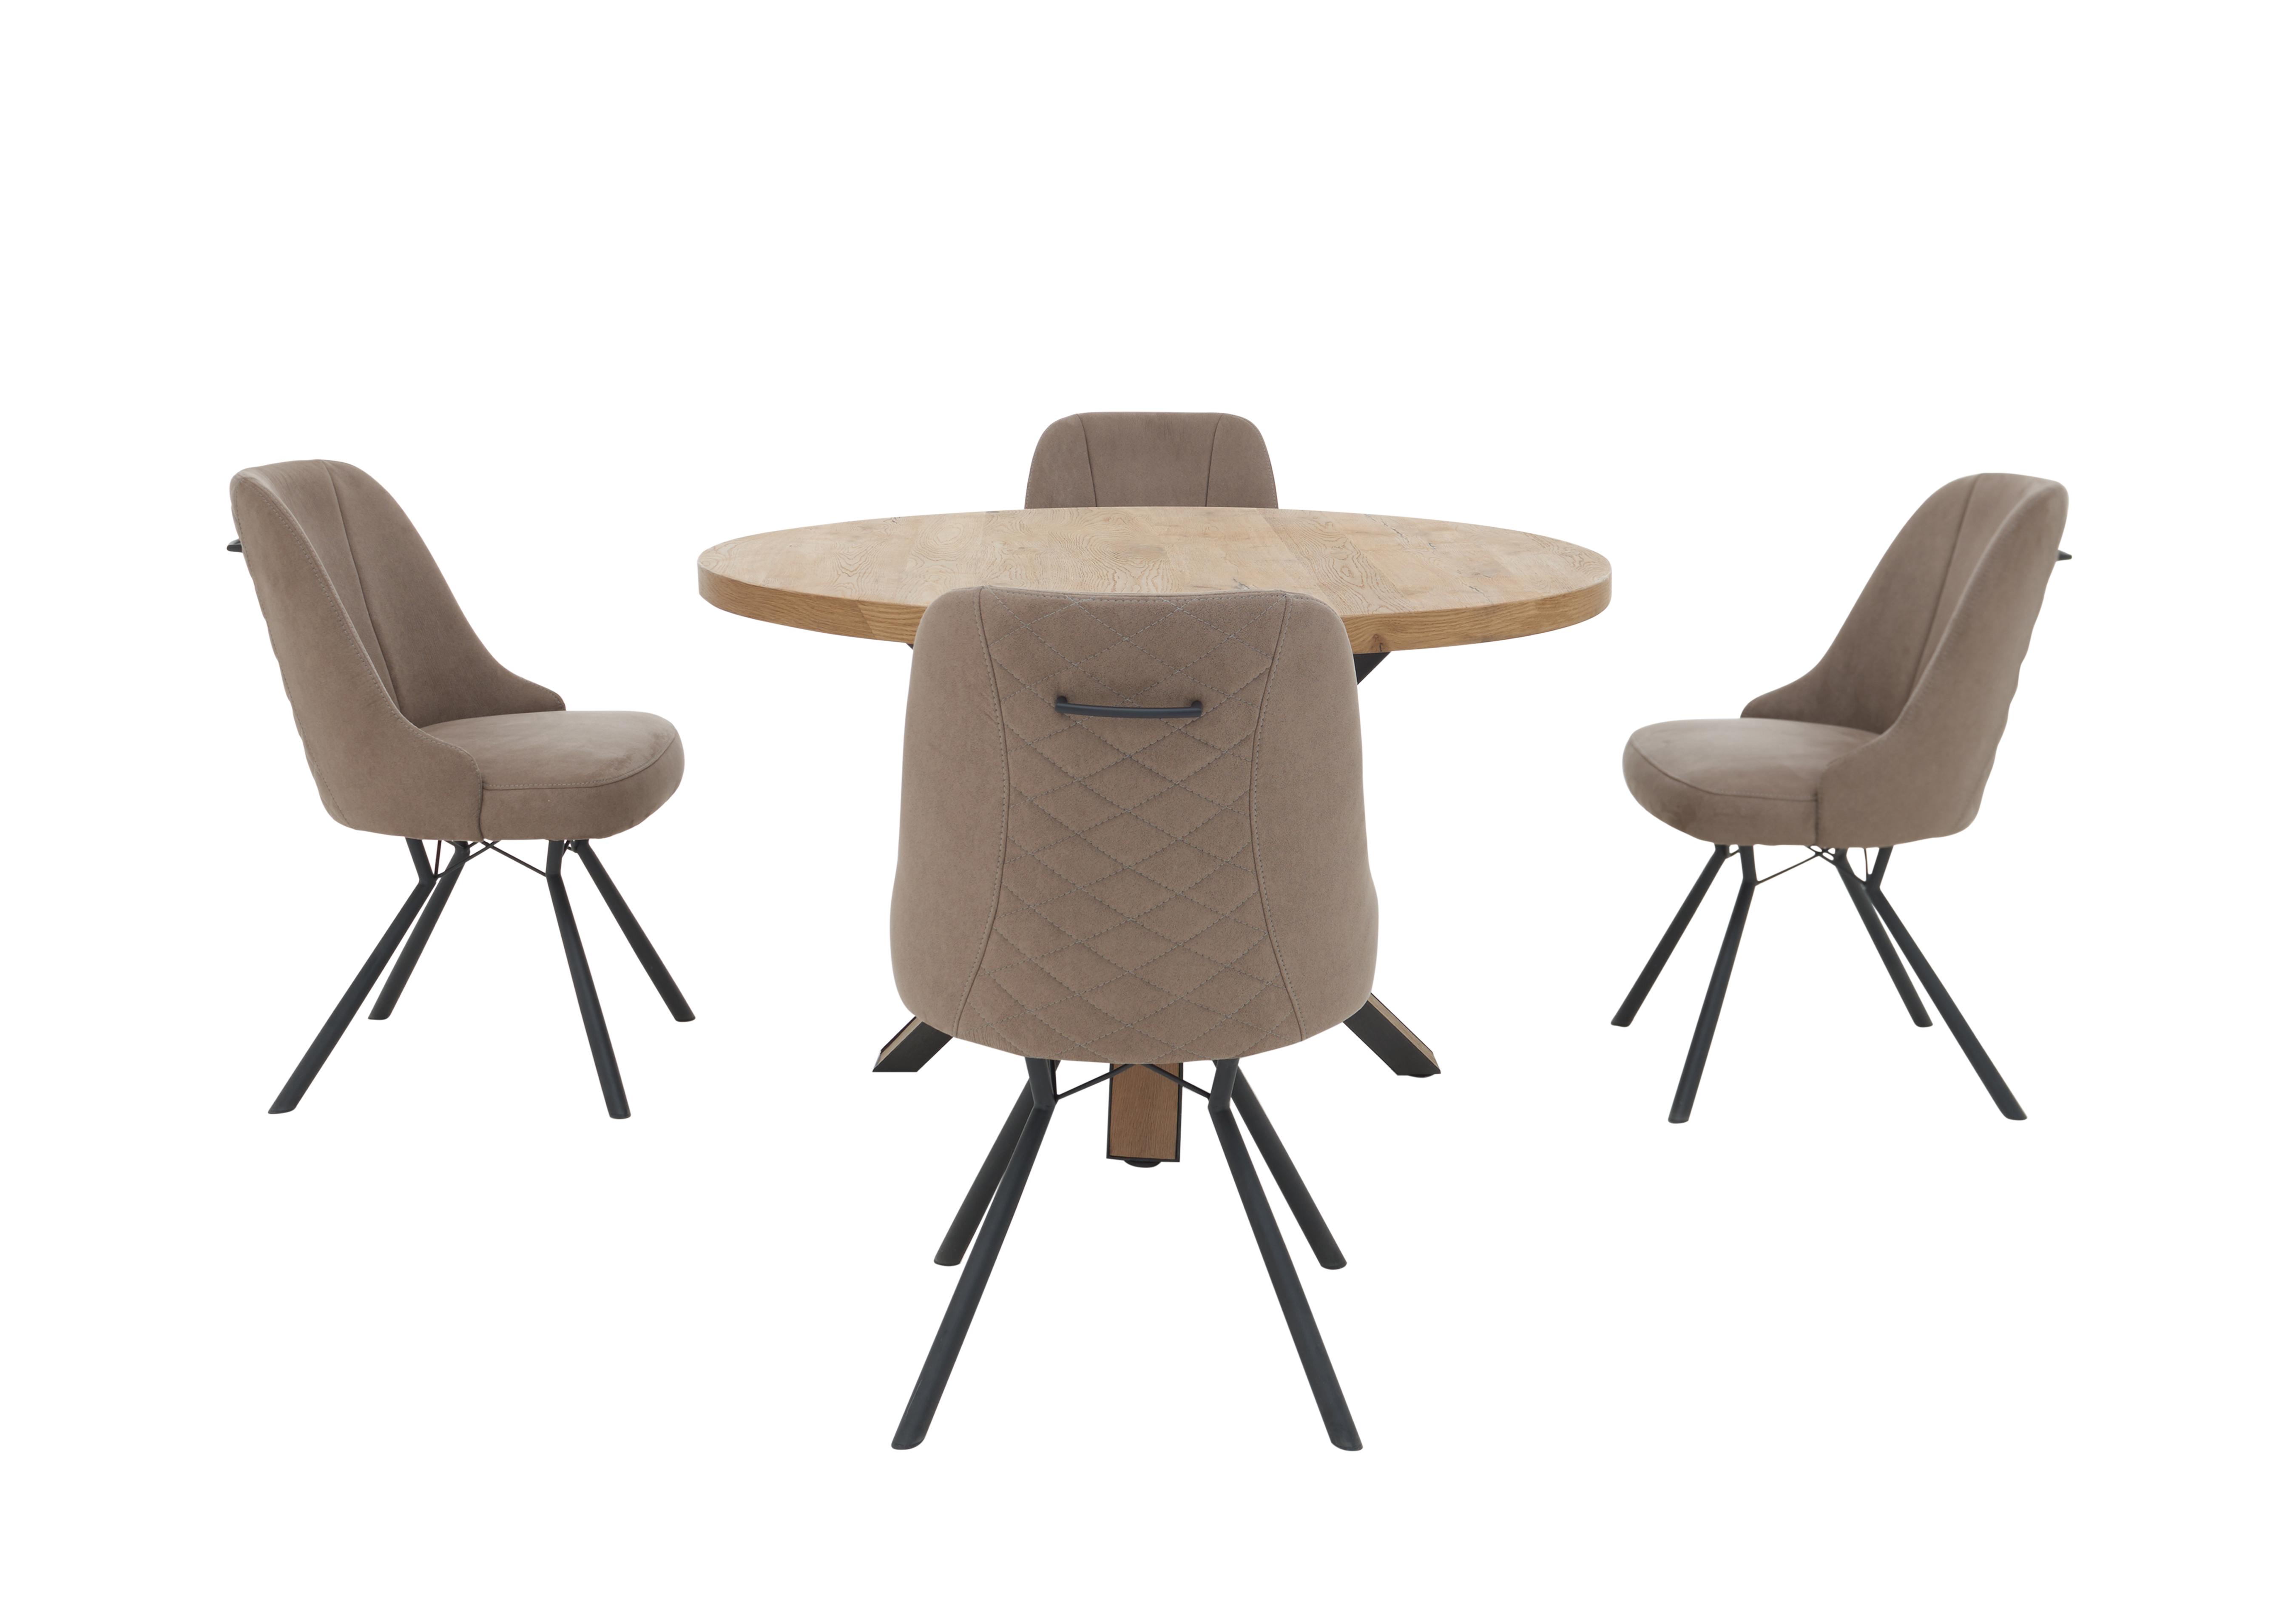 Detroit Starburst Leg Round Dining Table and 4 Detroit Dining Chairs in Taupe on Furniture Village